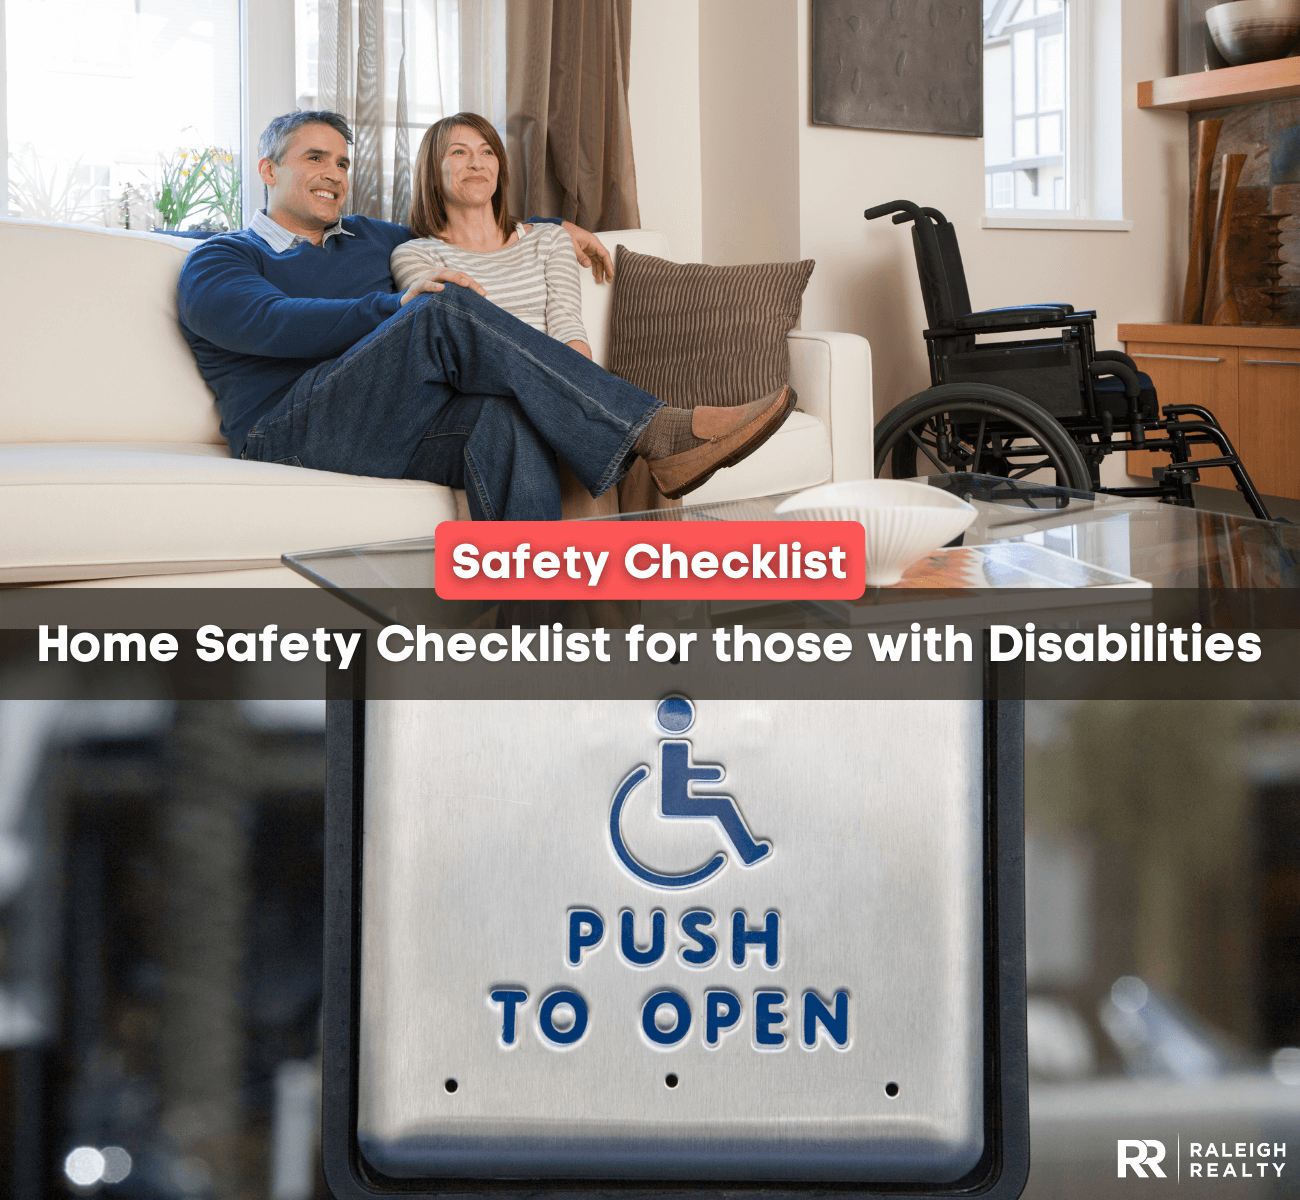 Home safety tips for those with disabilities and handicaps